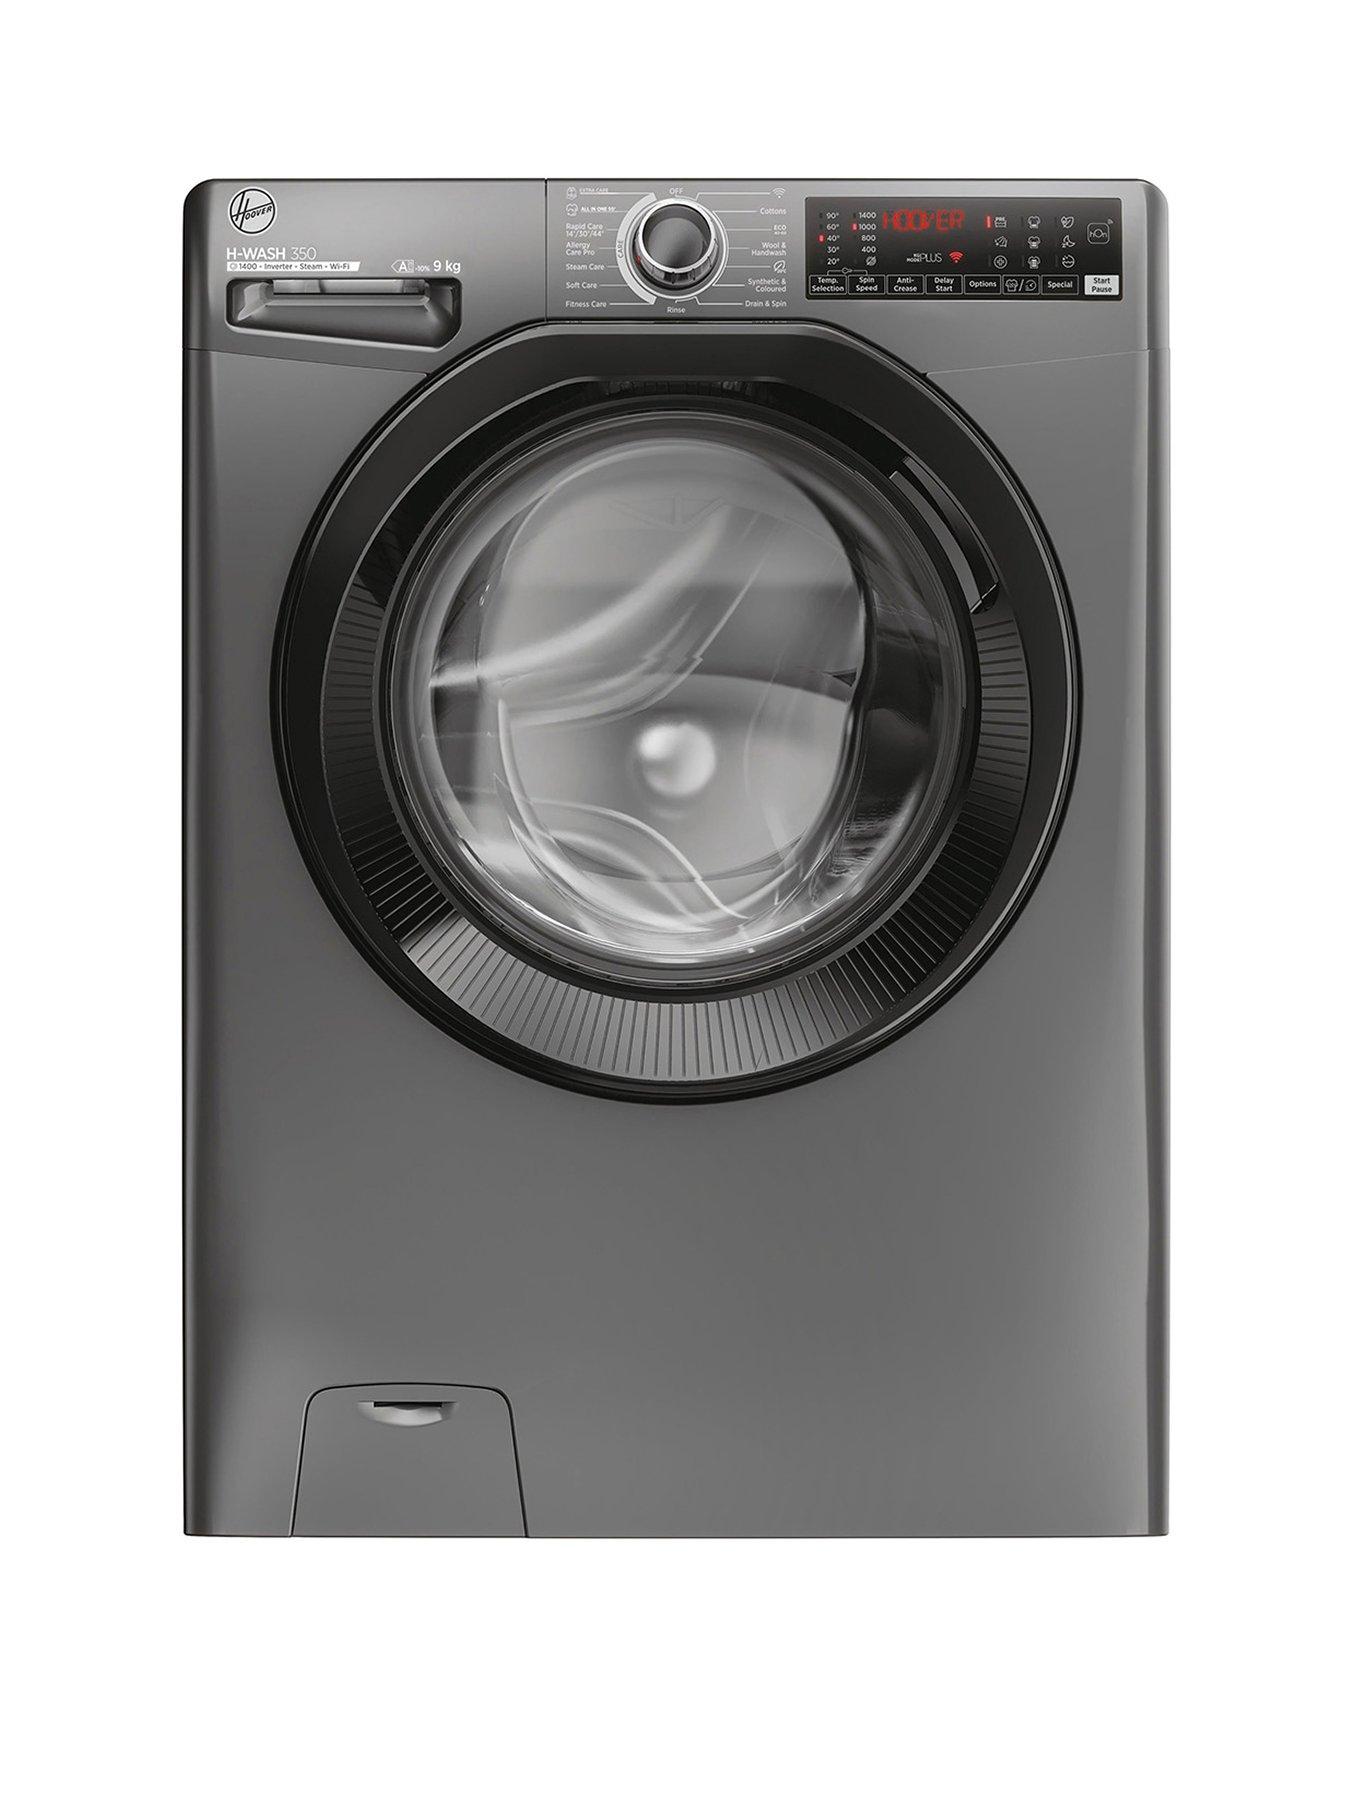 Hoover H-Wash 350 H3Wps496Tambr6-80 9Kg Washing Machine, 1400 Spin, A Rated, Wifi - Anthracite